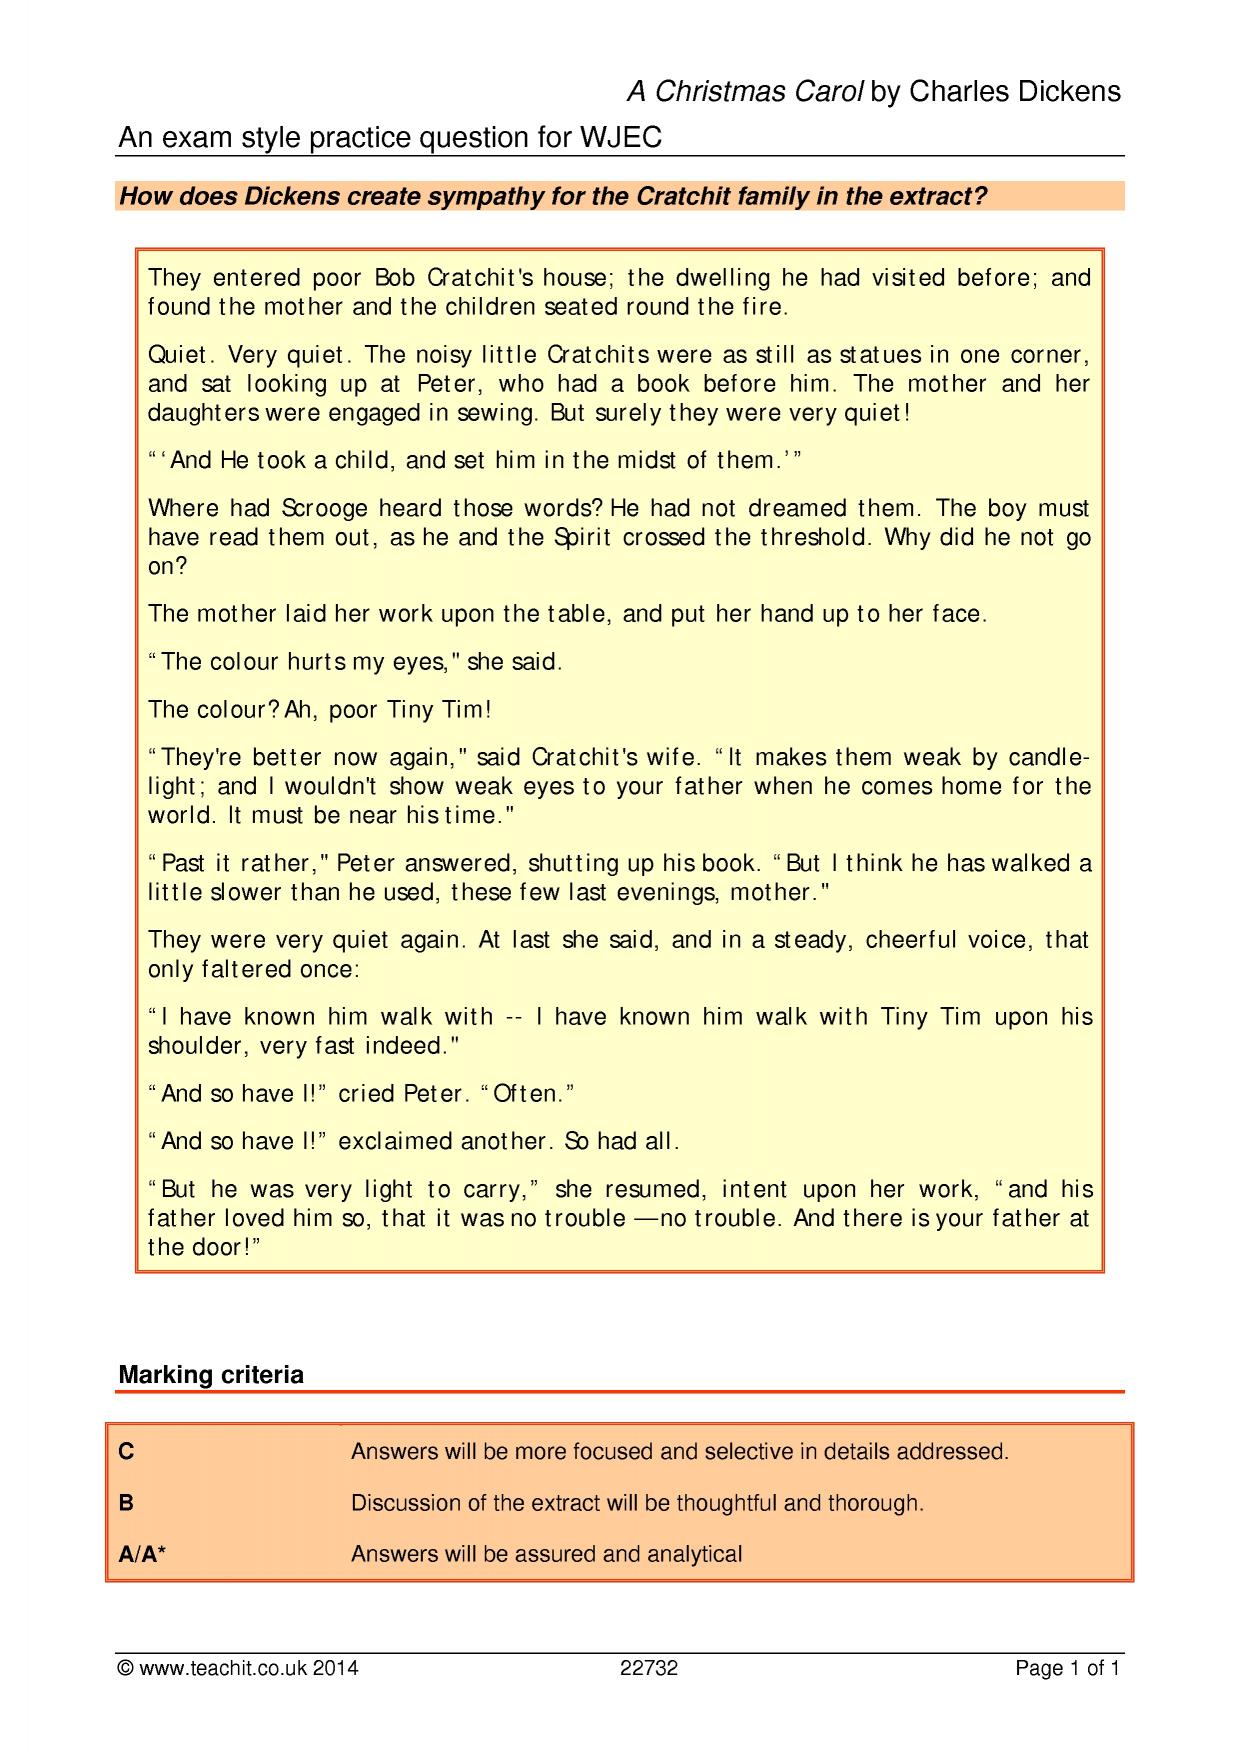 A Christmas Carol by Charles Dickens | KS4 Prose | Key Stage 4 | Resources